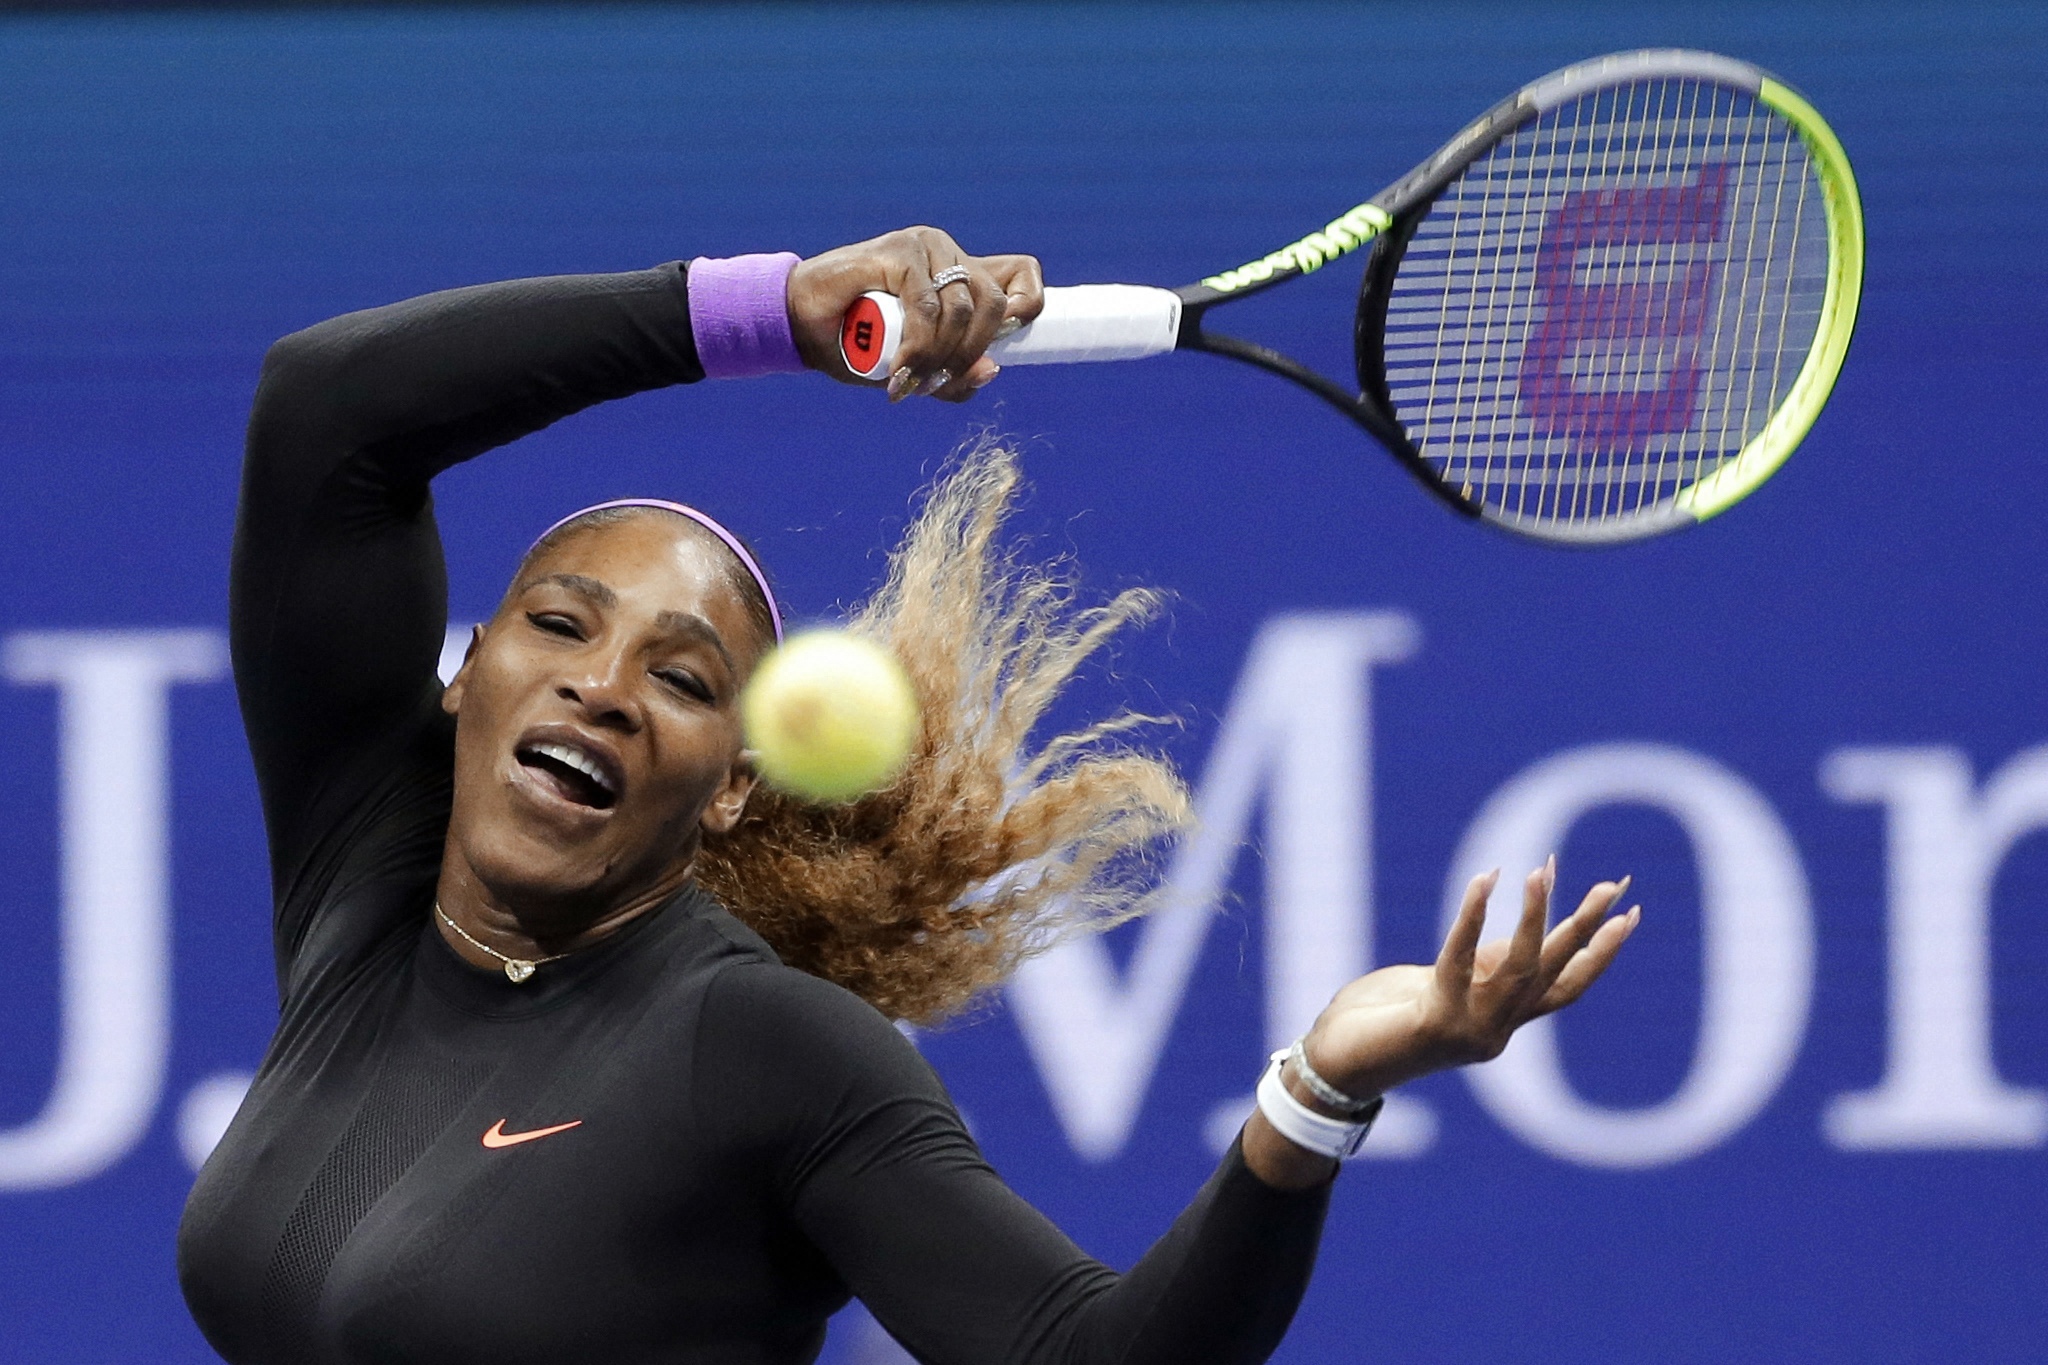 Serena Williams, US Open, Grand Slam, Tennis, Ashleigh Barty, Margaret Courts record, Wang Qiang